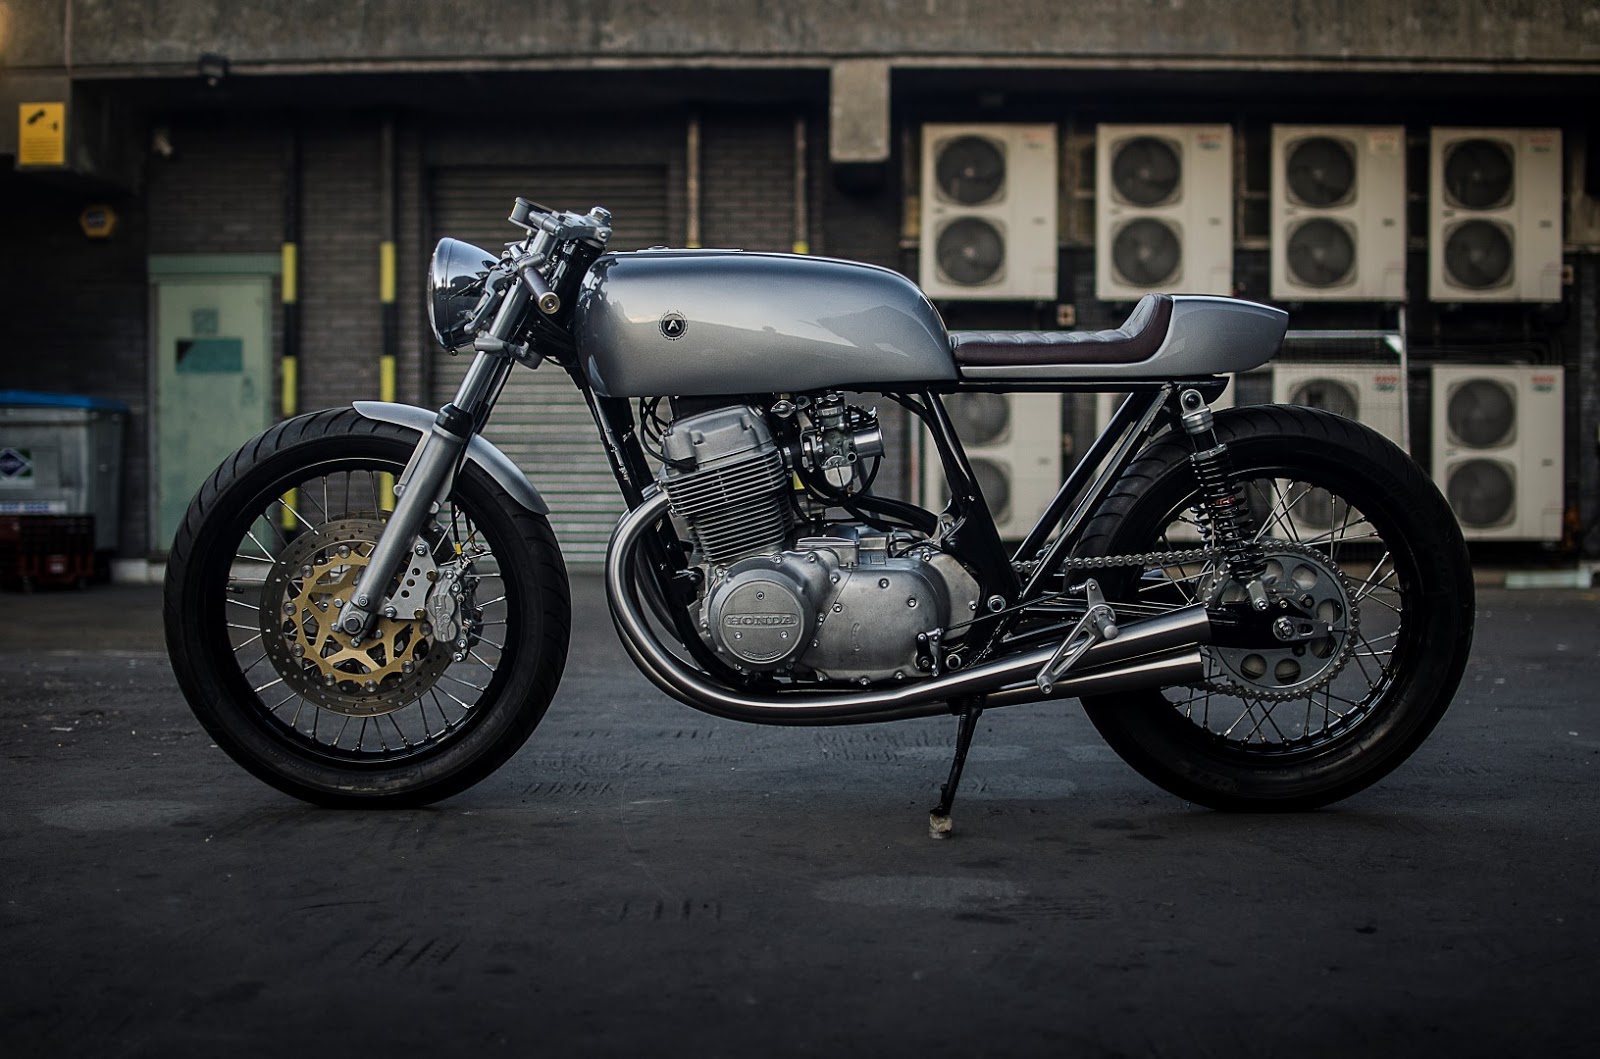 Honda CB 750 Cafe Racer "Type13" by Auto Fabrica - Lsr Bikes